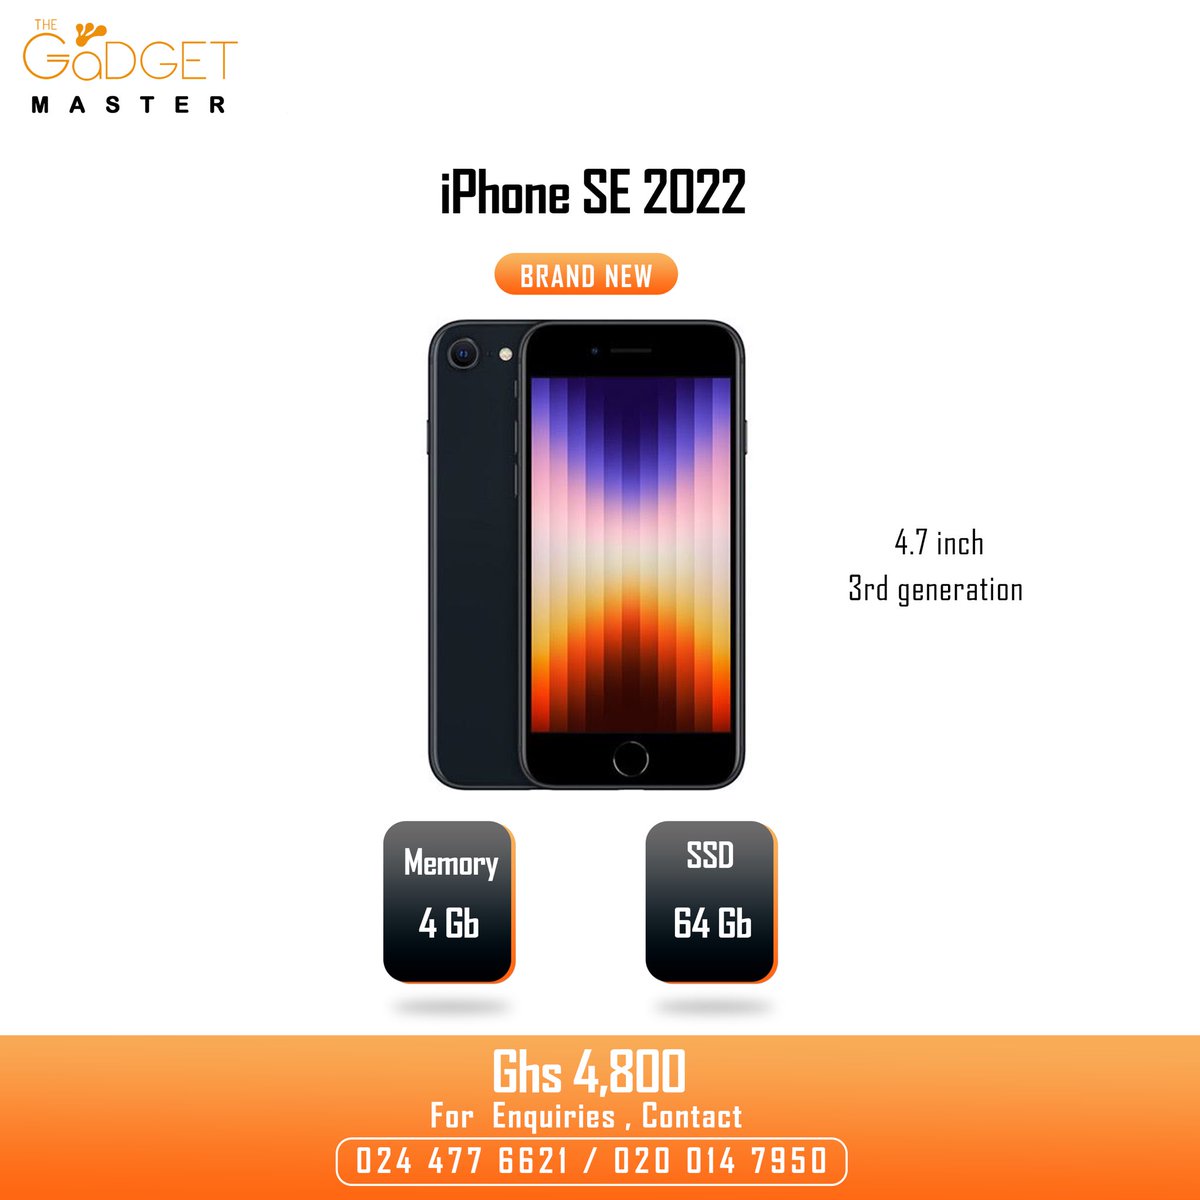 iPhone SE 2022
3rd generation 
64gb storage 
4gb memory 
4.7 inch

Price @ Ghs 4,800.00 

Kindly Dm, call / WhatsApp 0244776621 / 020 014 7950 

#phone #smartphone #iphonese #android #iphone11 #iphone12 #gifts #best #ghana #phoneshop #electronicstore